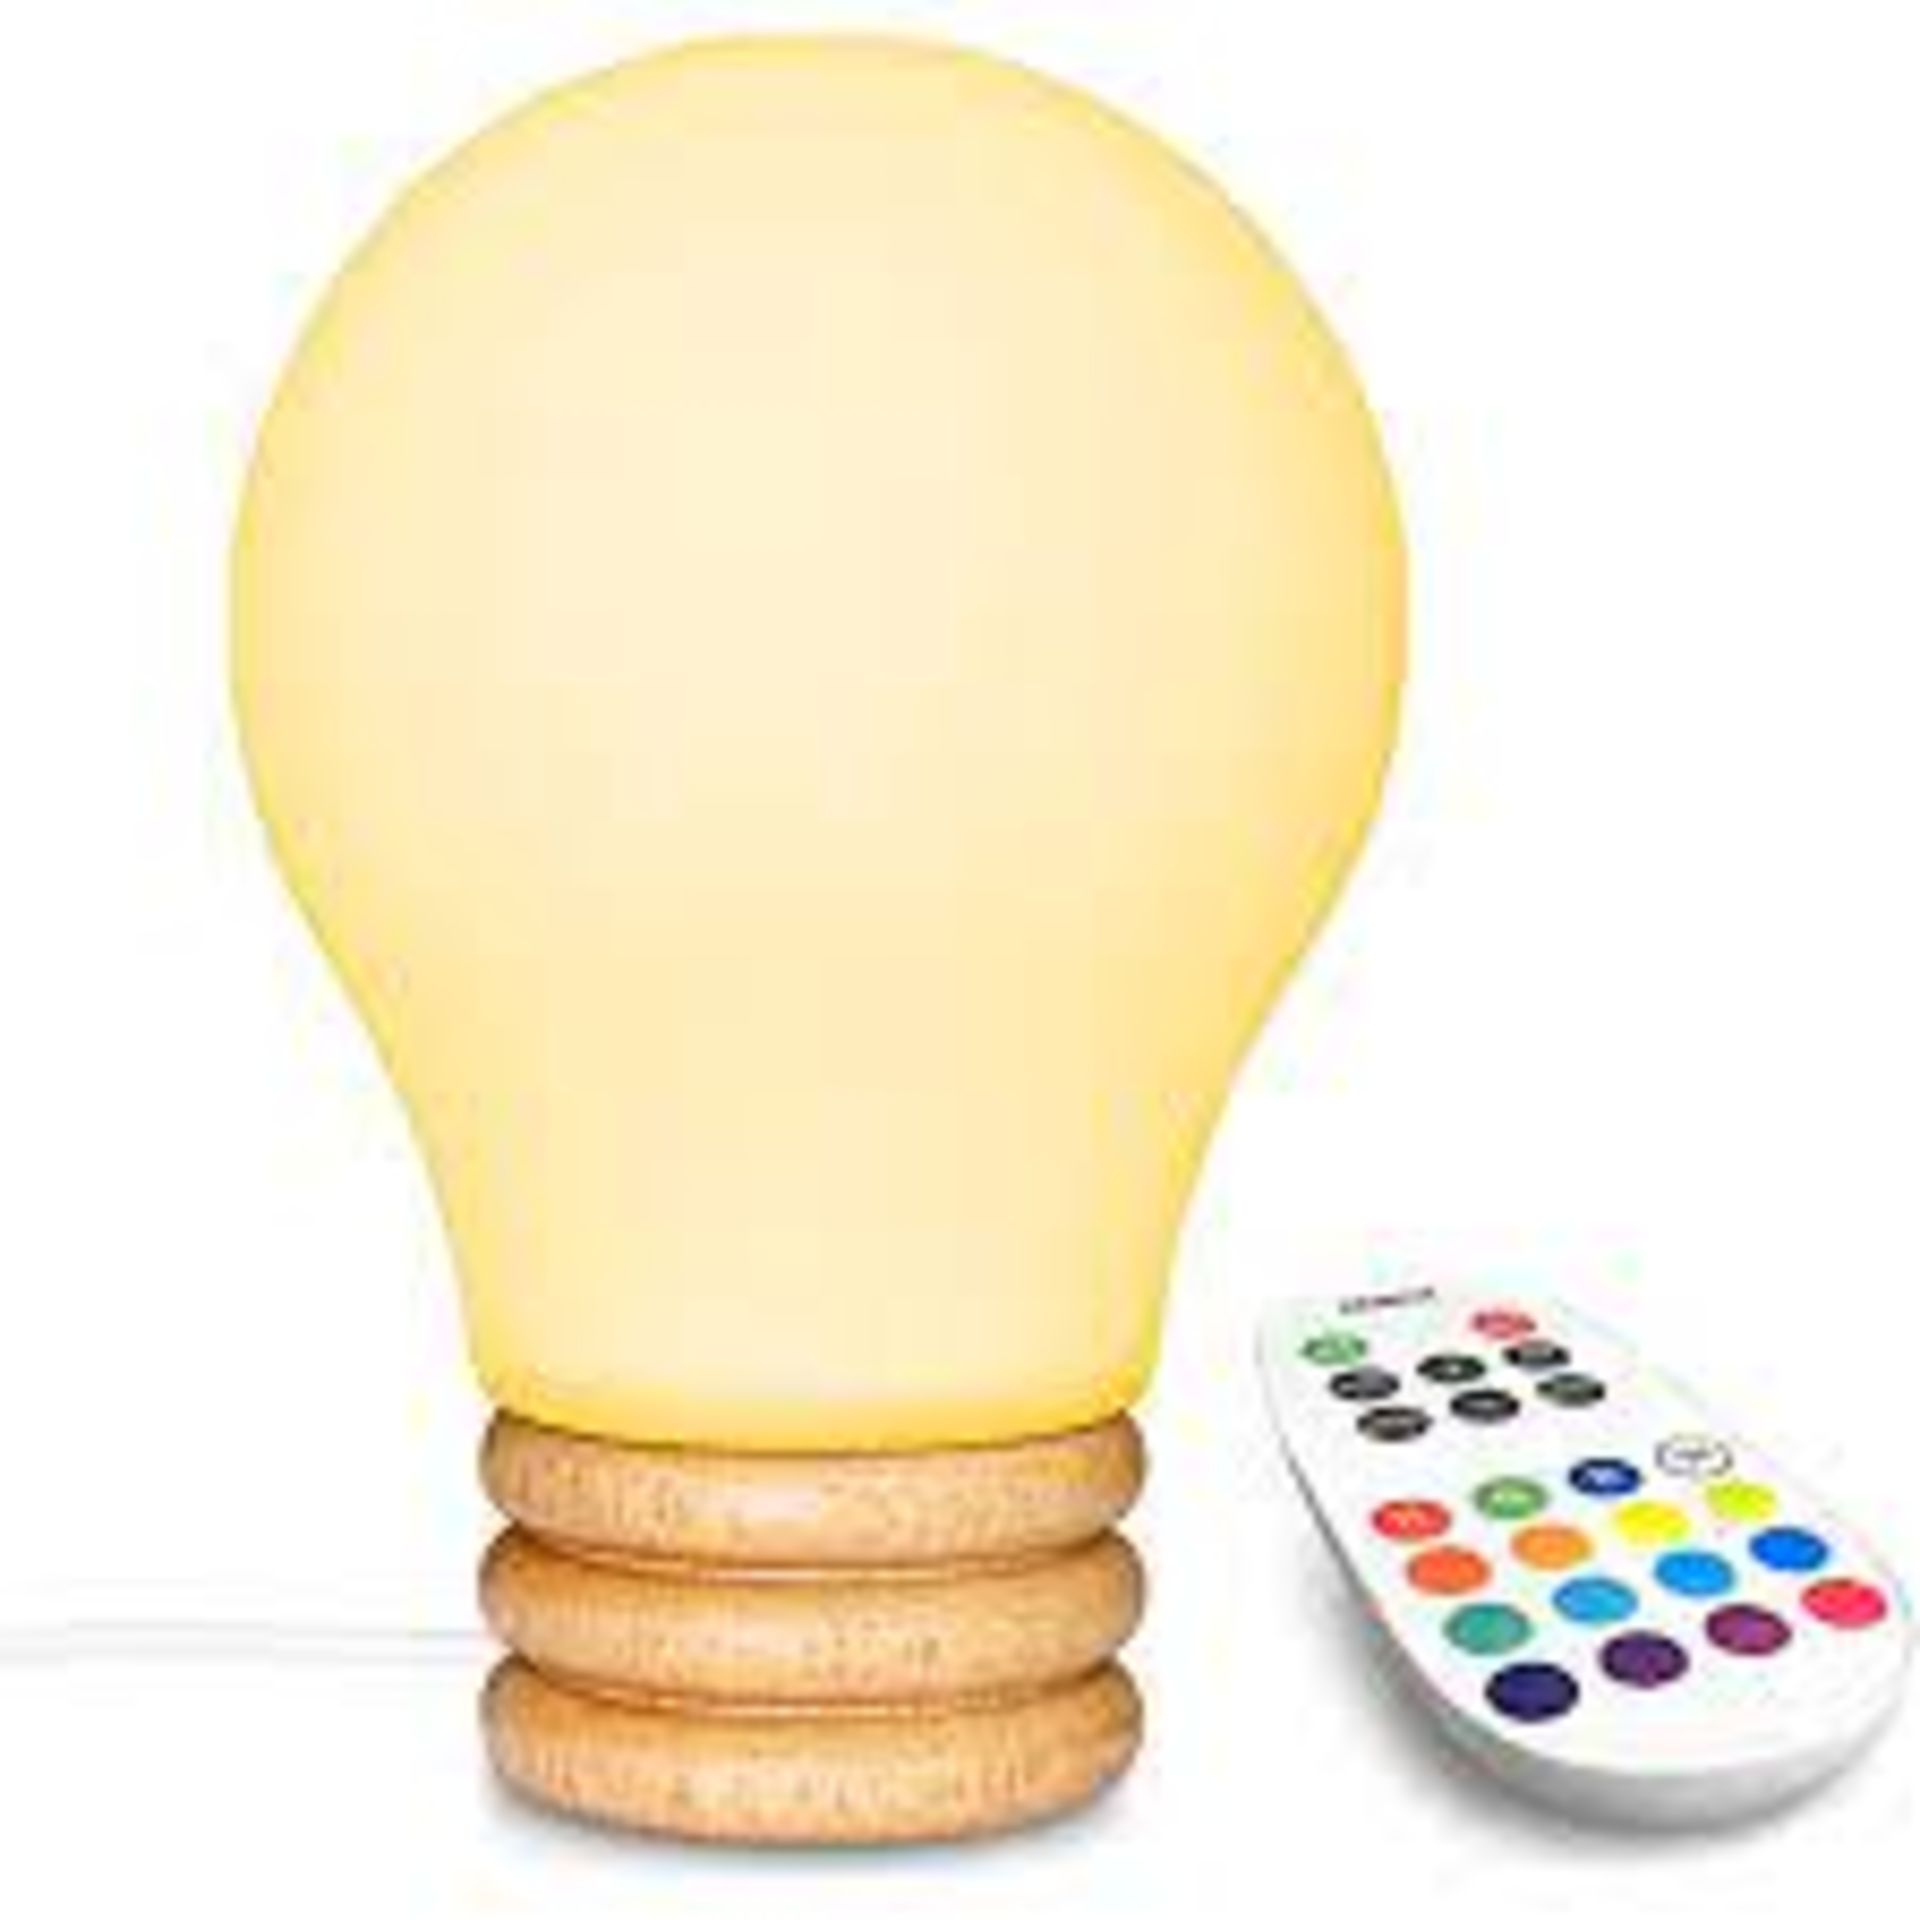 15 X BRAND NEW WOODEN BASE BULB DESIGN NIGHT LIGHT (COLOURS MAY VARY)